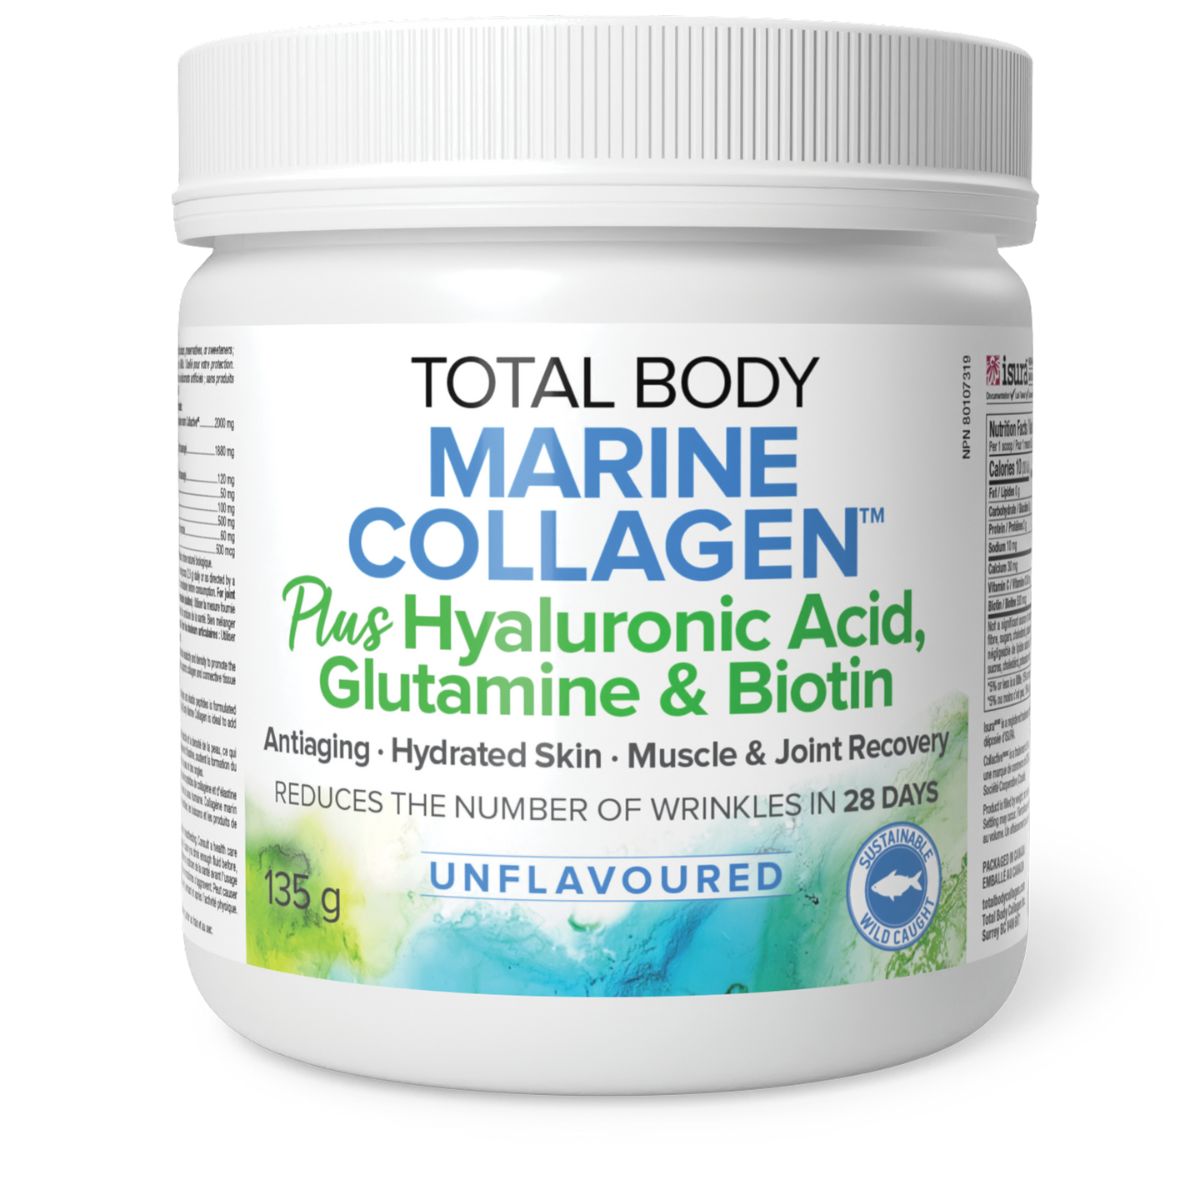 Image of Total Body Collagen (brand) - Marine Collagen with Hyaluronic acid, Glutamine, and Biotin; Unflavoured powder; 135g. Product reads, "Antiagin, Hydrated skin, muscle & joint recovery, reduce the number of wrinkles." 